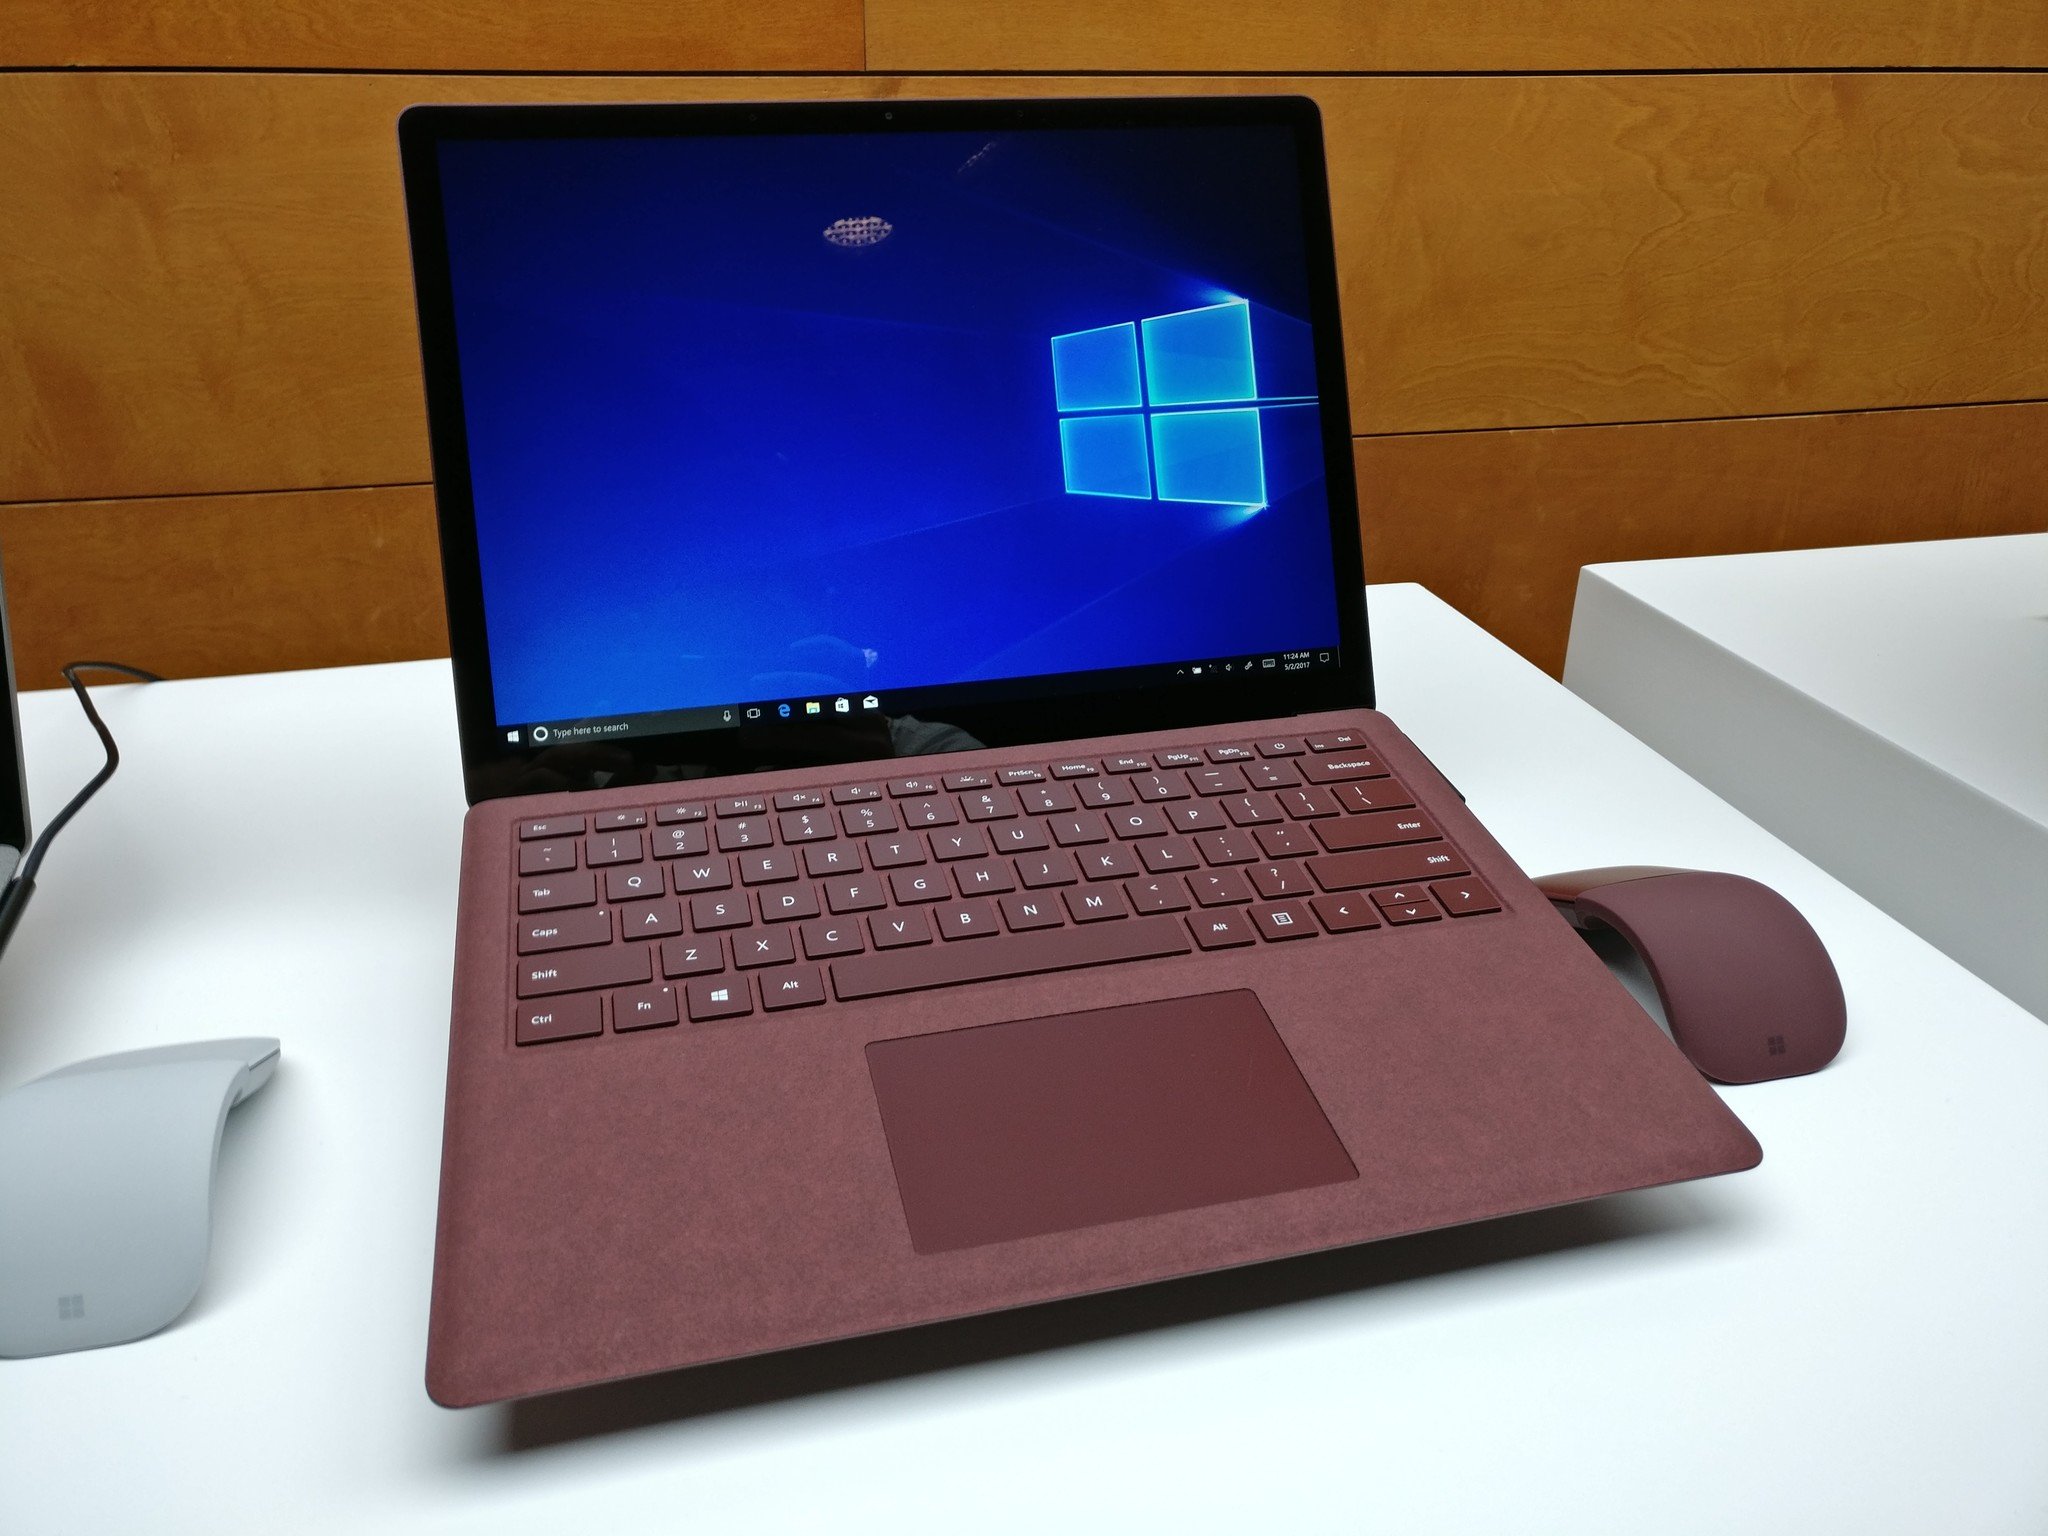 Should you buy Microsoft's Surface Pro or Surface Laptop? | Windows Central